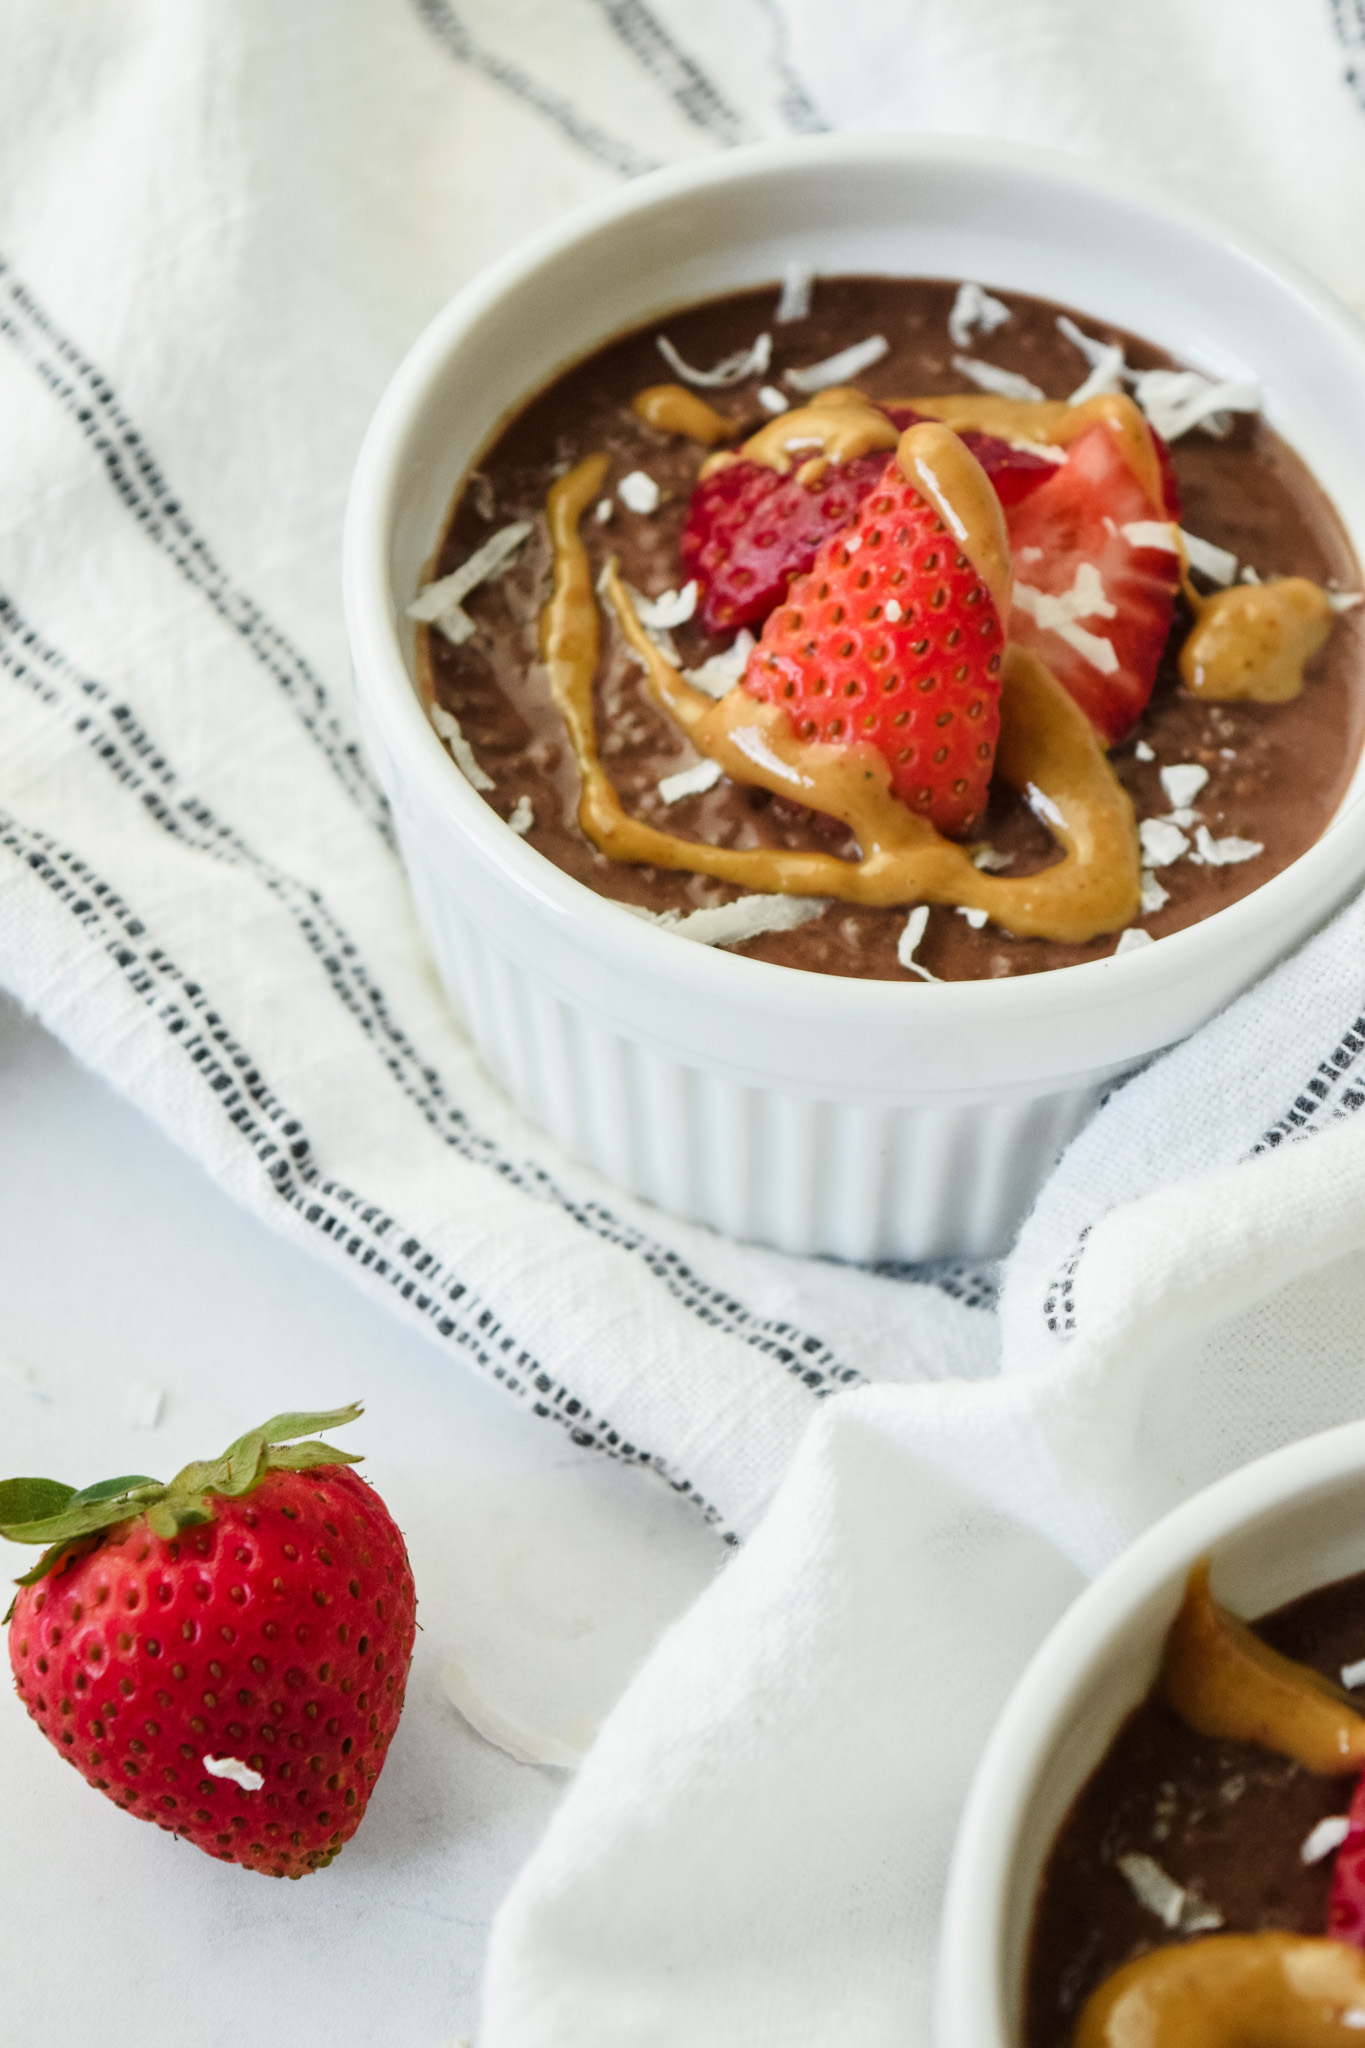 Chocolate Chia Pudding with a Peanut Butter Drizzle and Strawberries